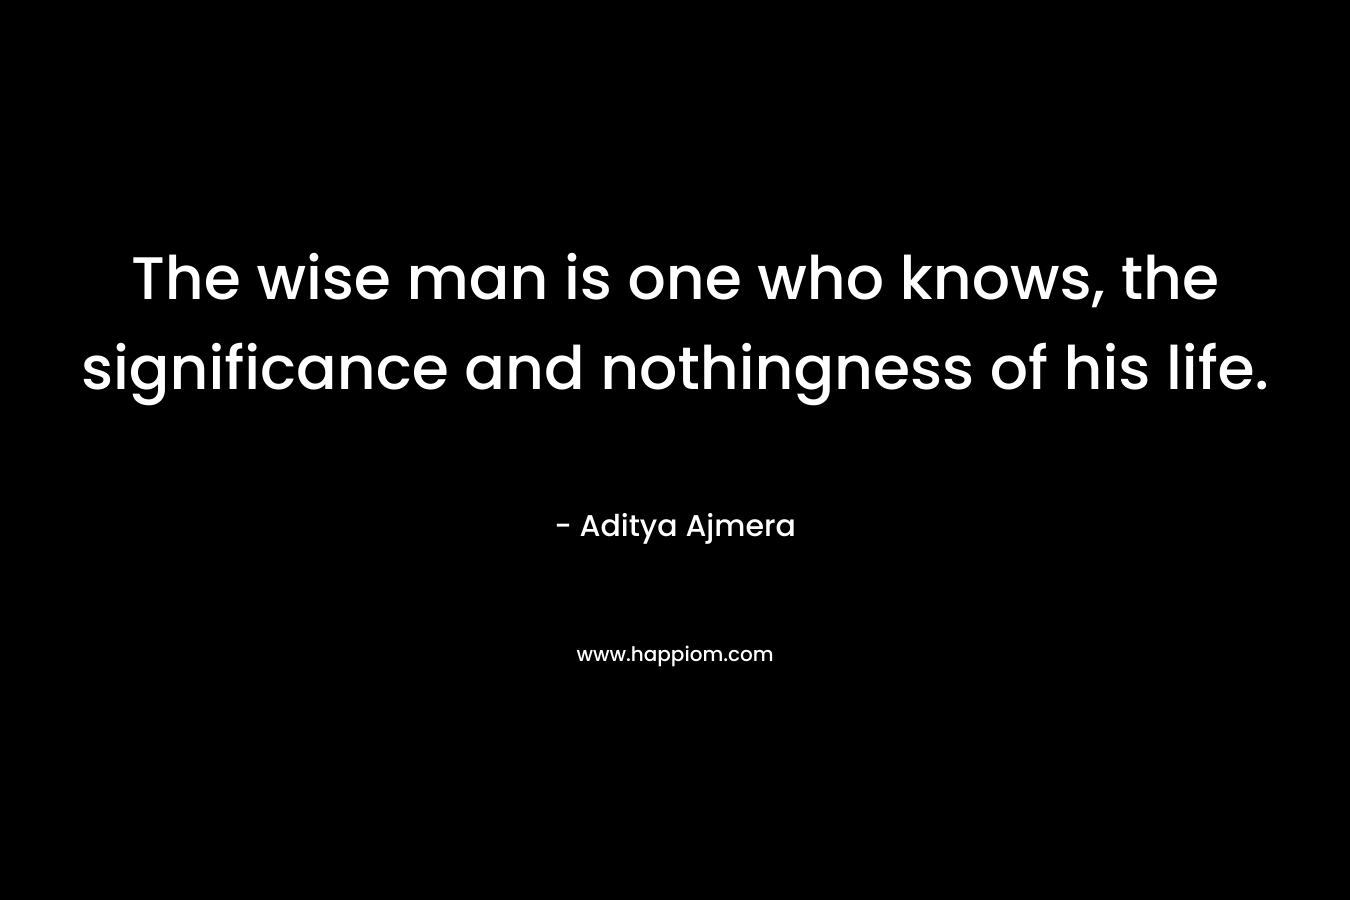 The wise man is one who knows, the significance and nothingness of his life. – Aditya Ajmera